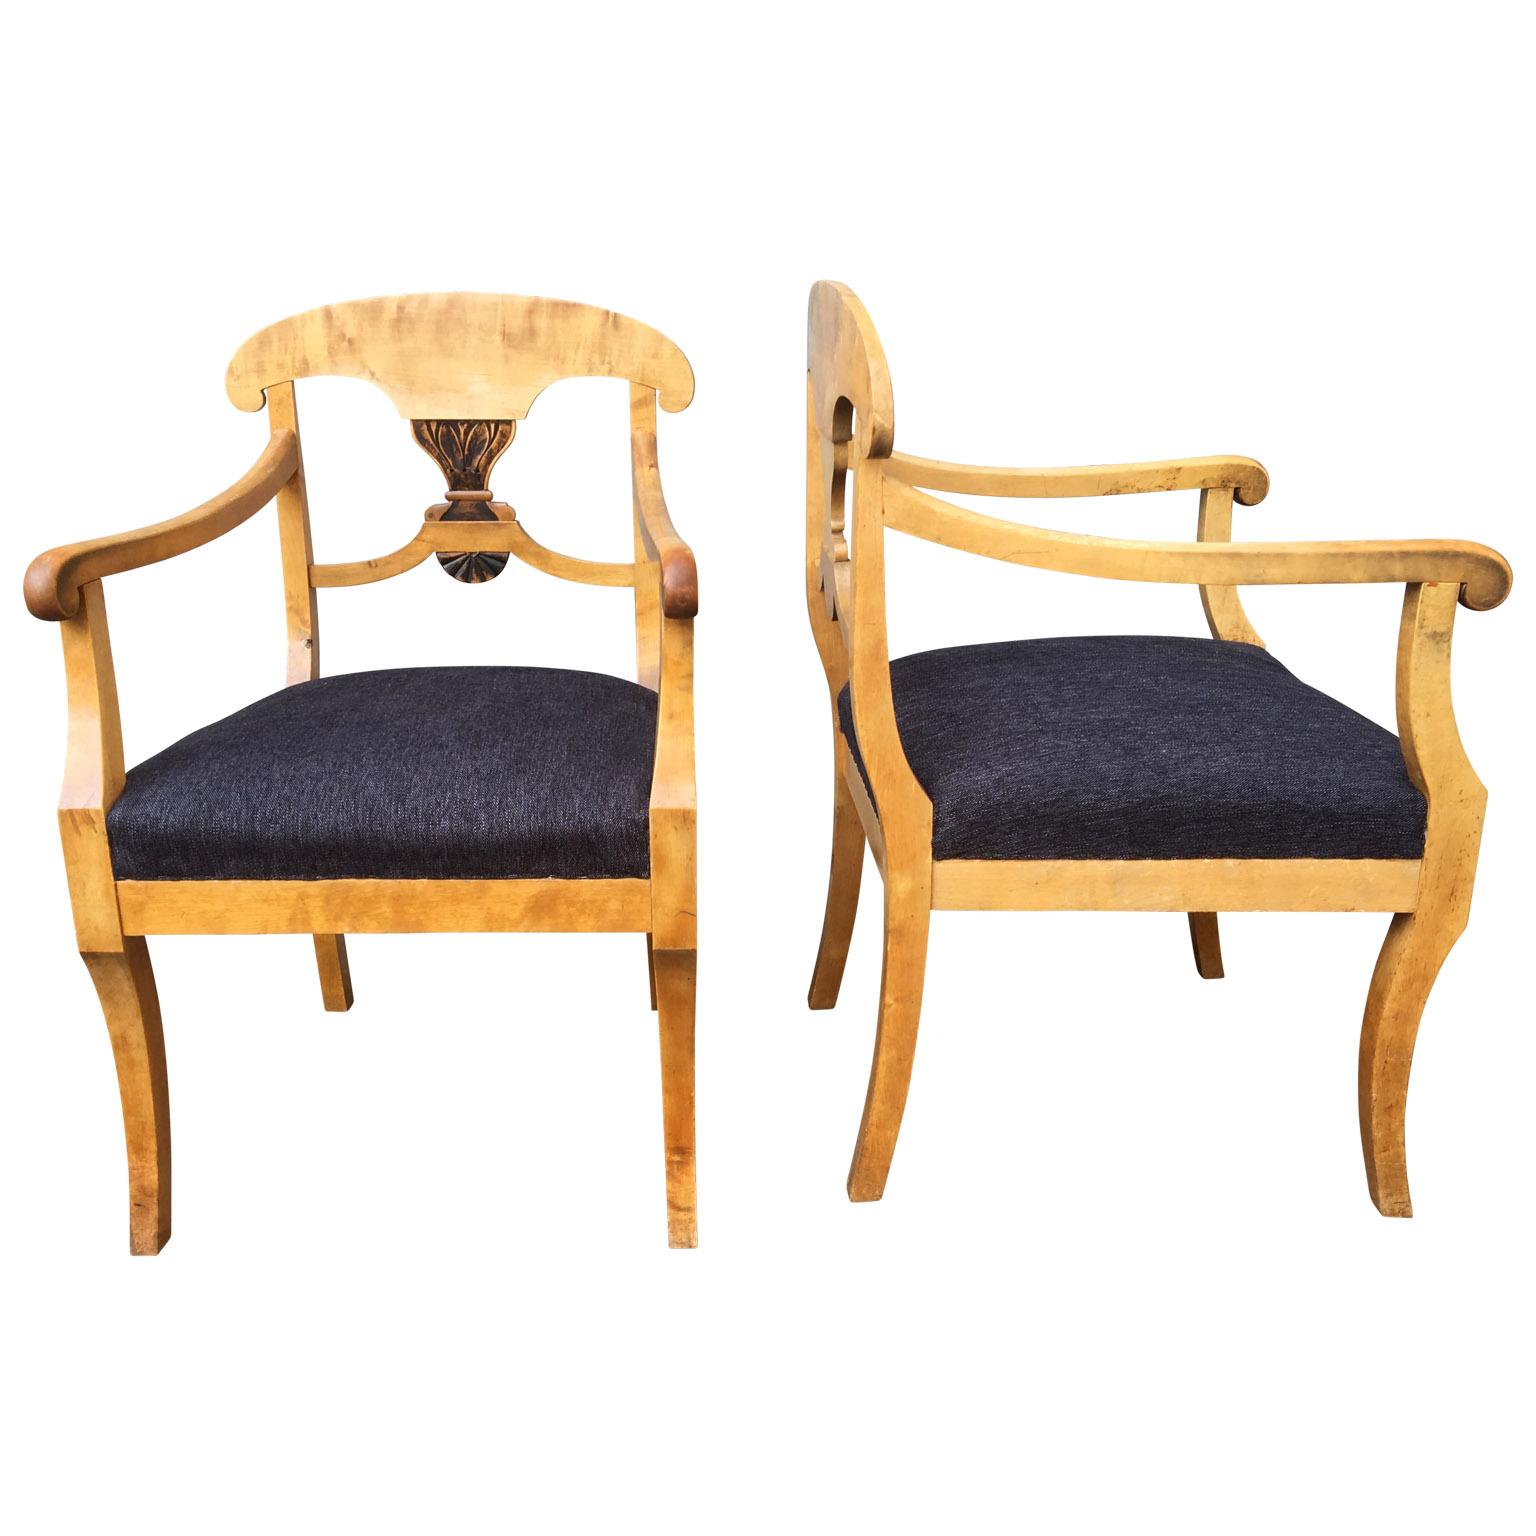 Pair of Swedish birchwood Art Deco armchairs, circa 1920s

Chairs are newly upholstered.
